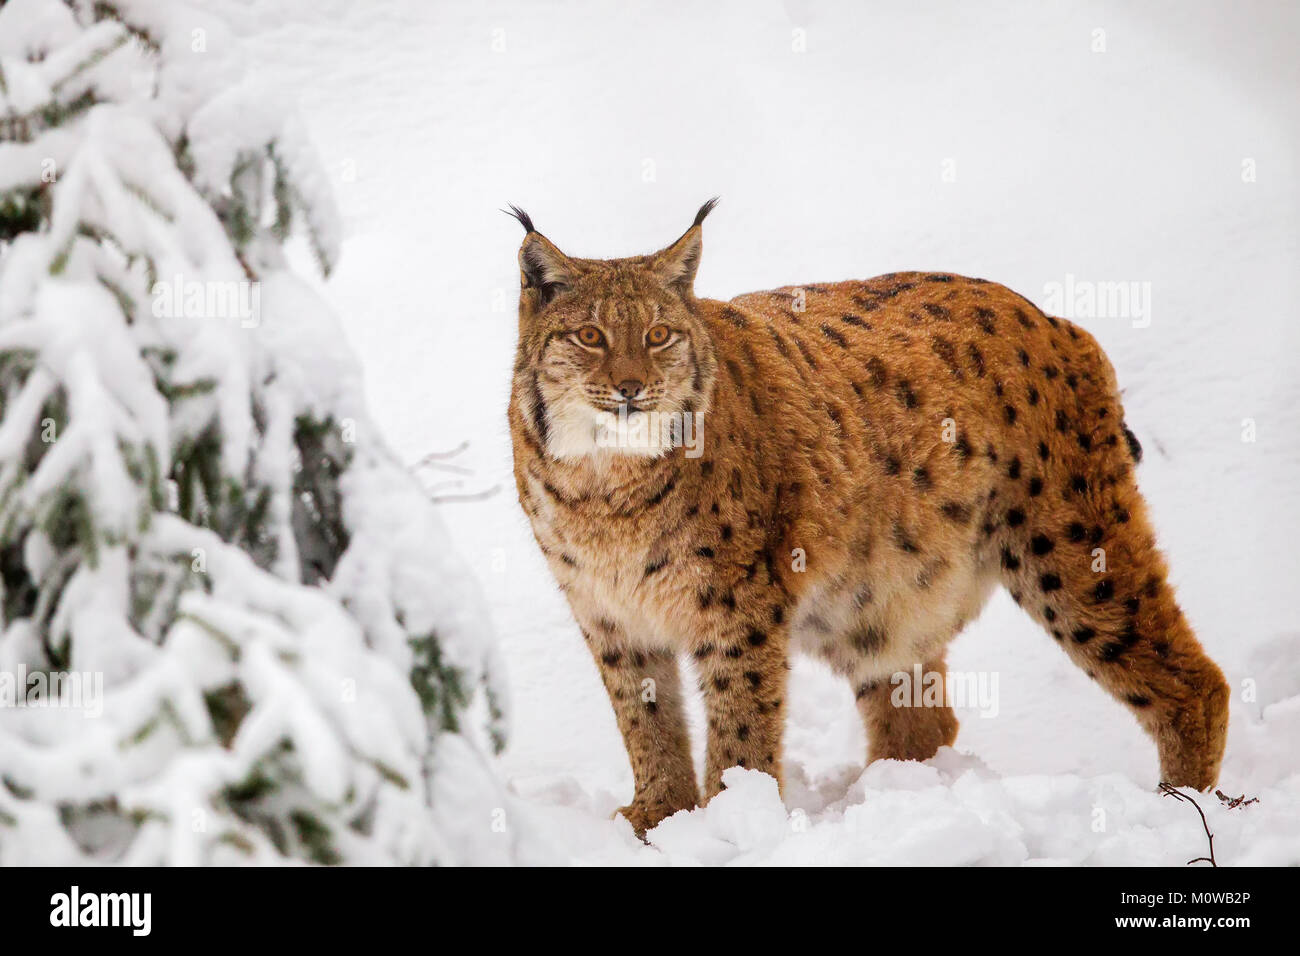 Eurasian lynx (Lynx lynx) in the snow in the animal enclosure in the Bavarian Forest National Park, Bavaria, Germany. Stock Photo